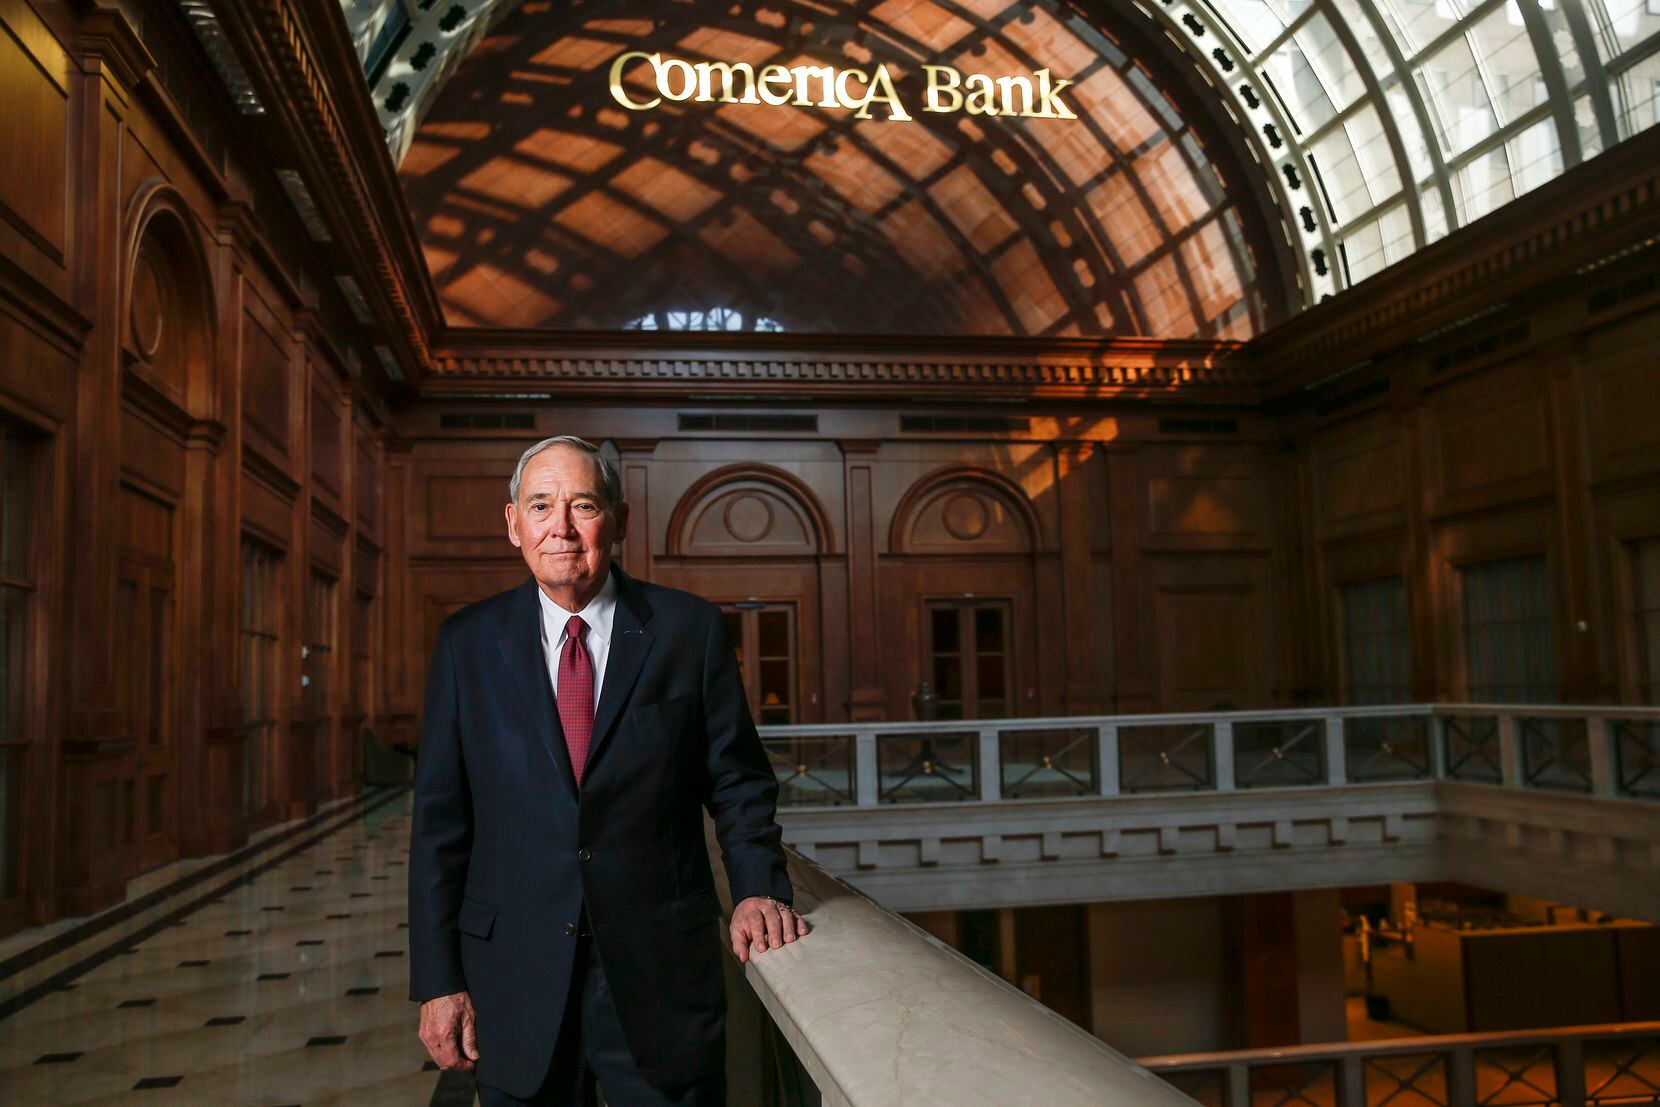 Ralph Babb, who is retiring from Comerica after serving as CEO and chairman, pushed the...